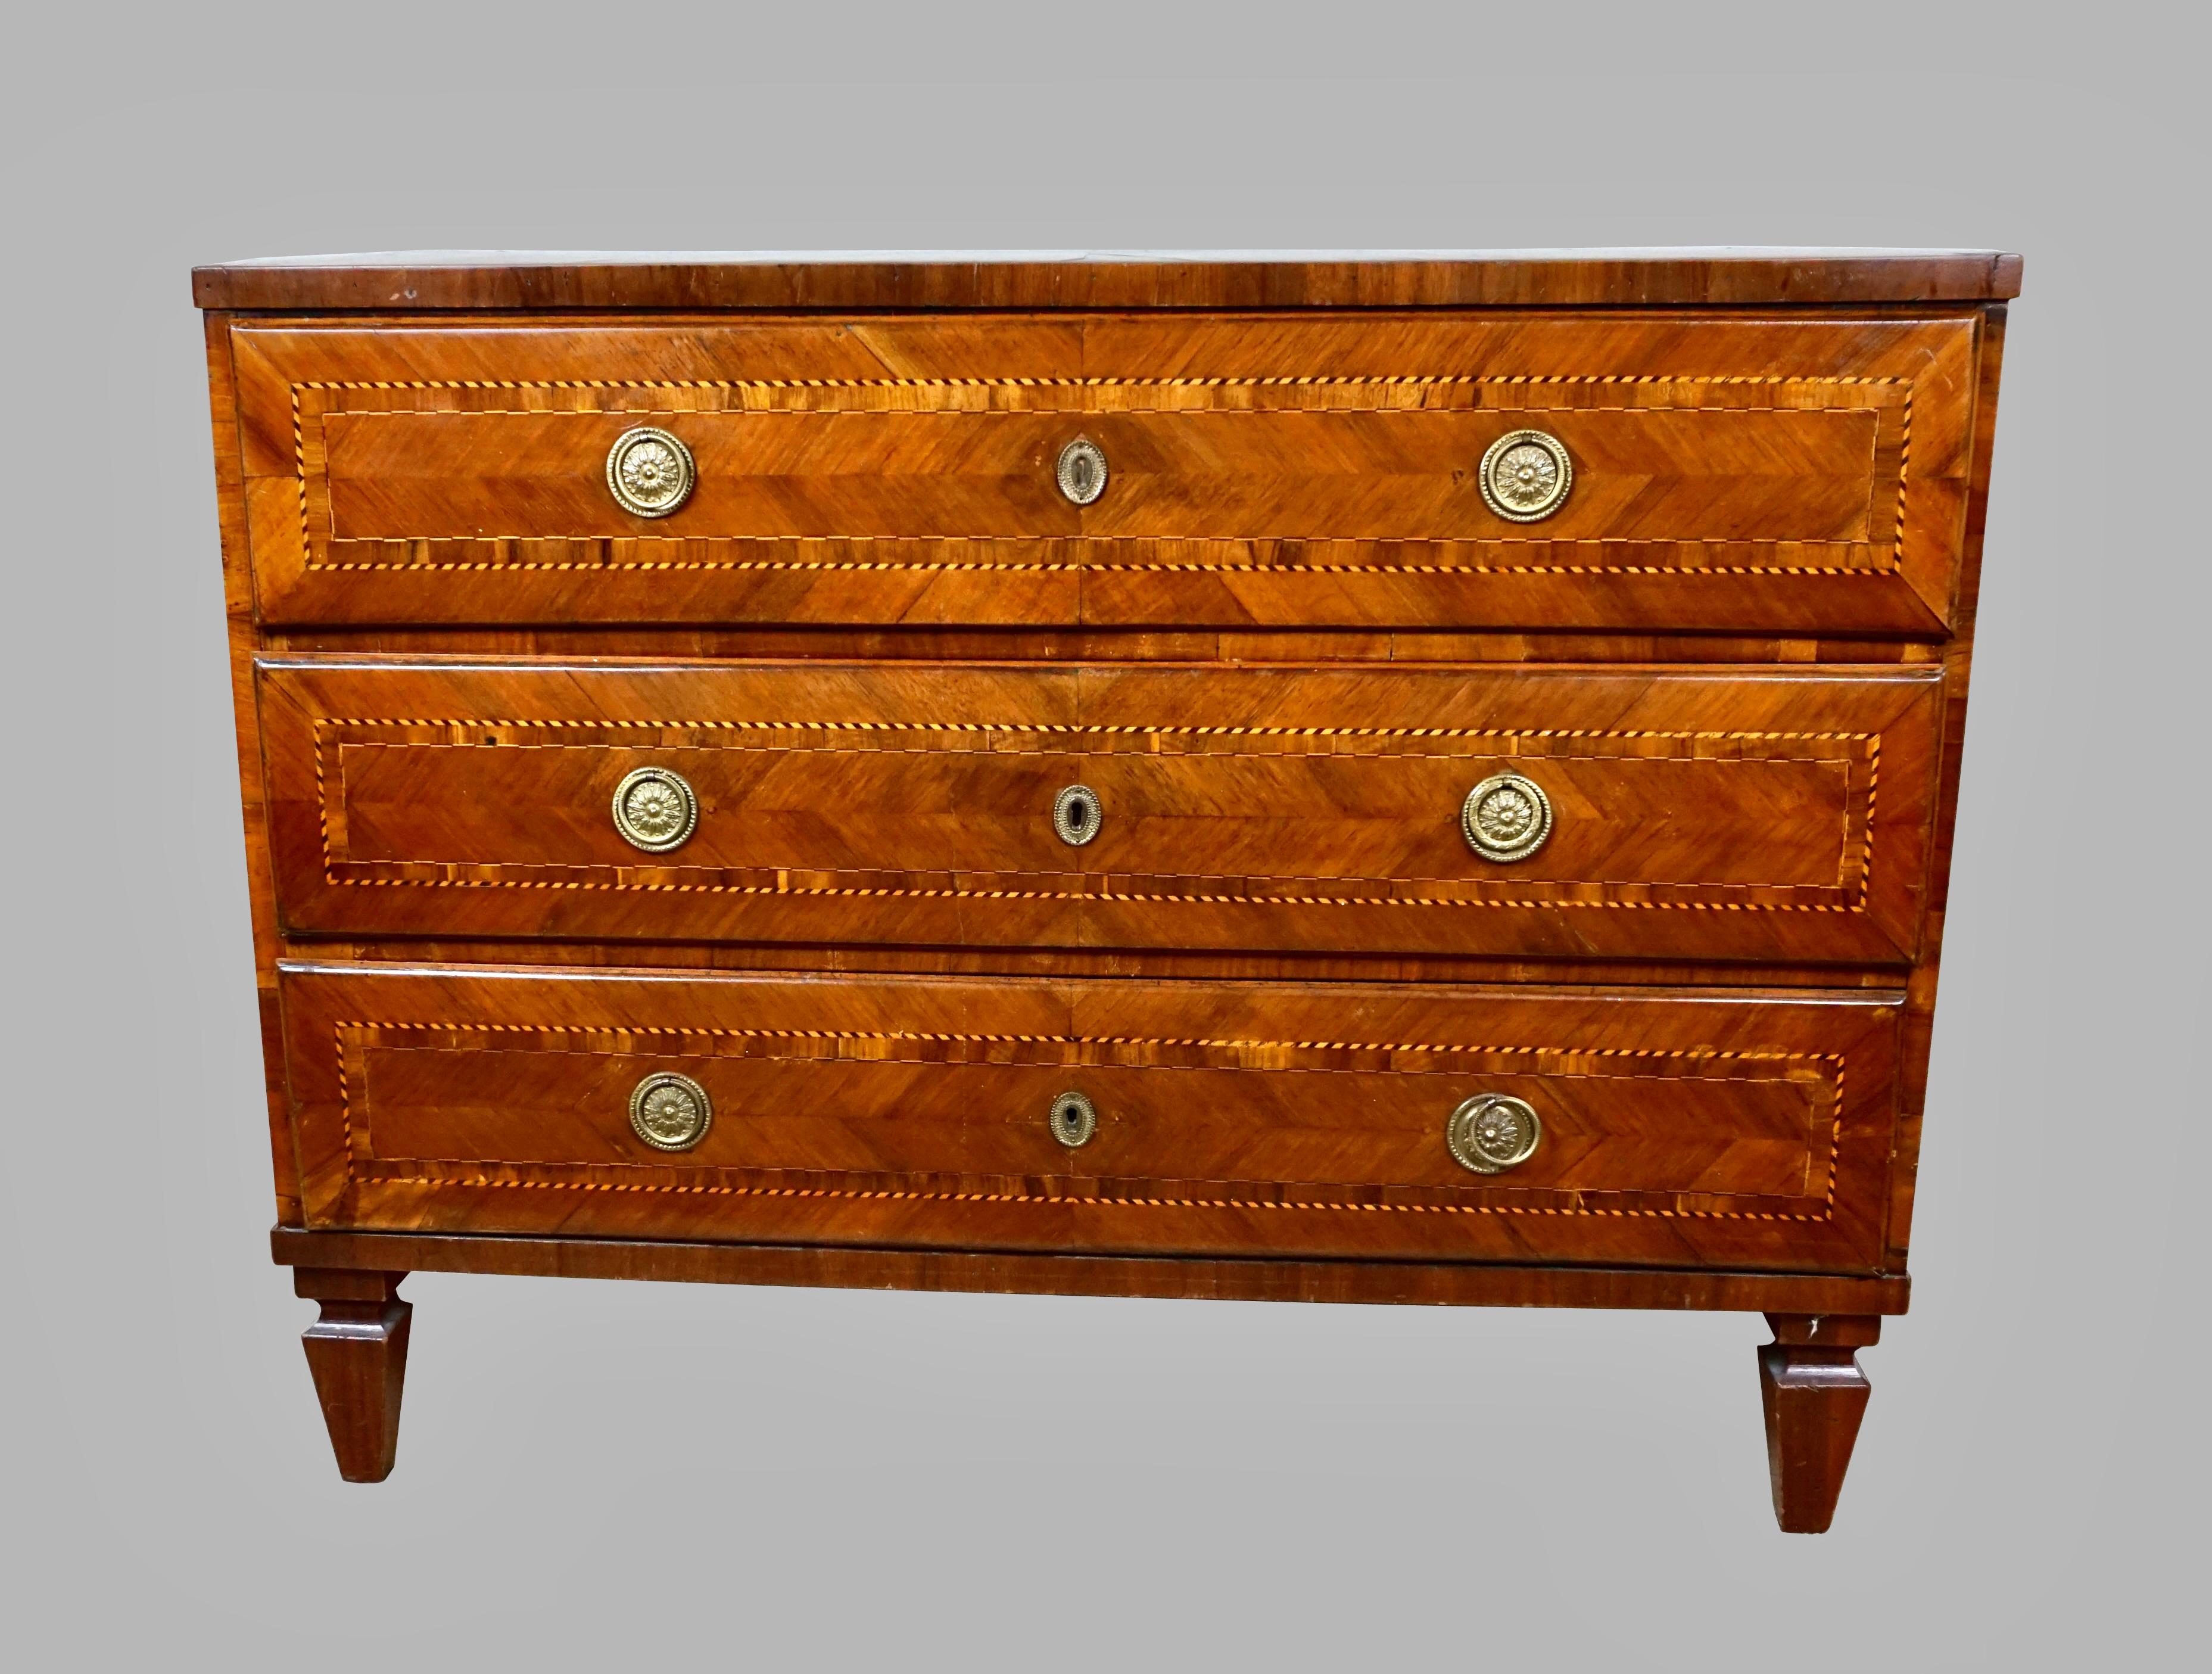 A substantial and handsome Italian walnut veneered Neoclassical 3 drawer chest, each drawer with attractive boxwood and ebony banding, further decorated with chevron veneered insets and framing of the entire drawer. The top and sides are similarly